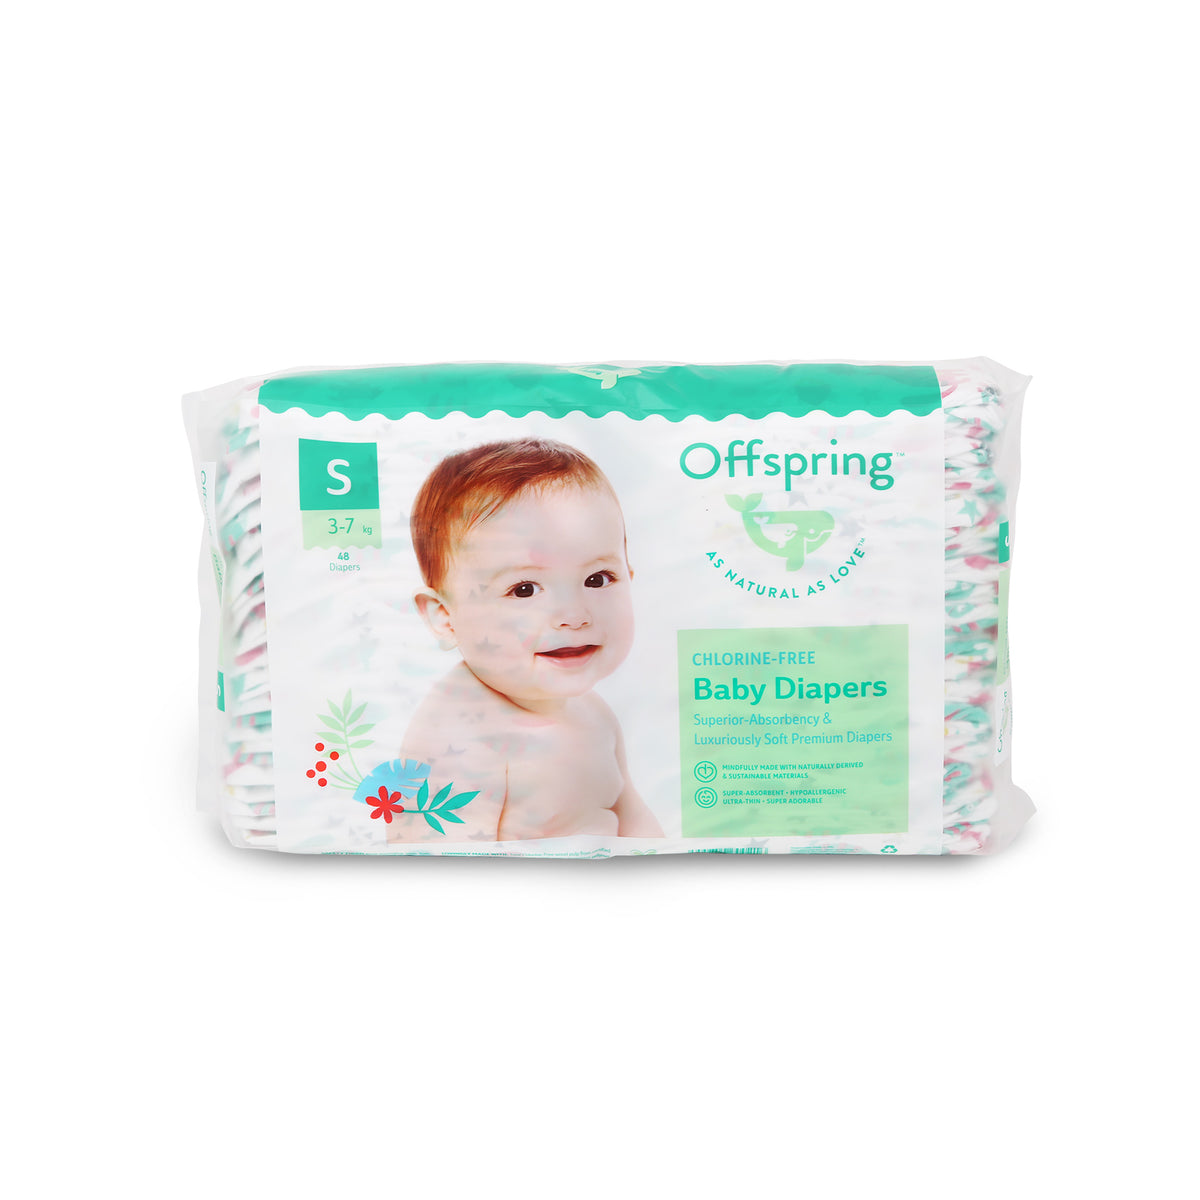 Offspring Fashion Diapers